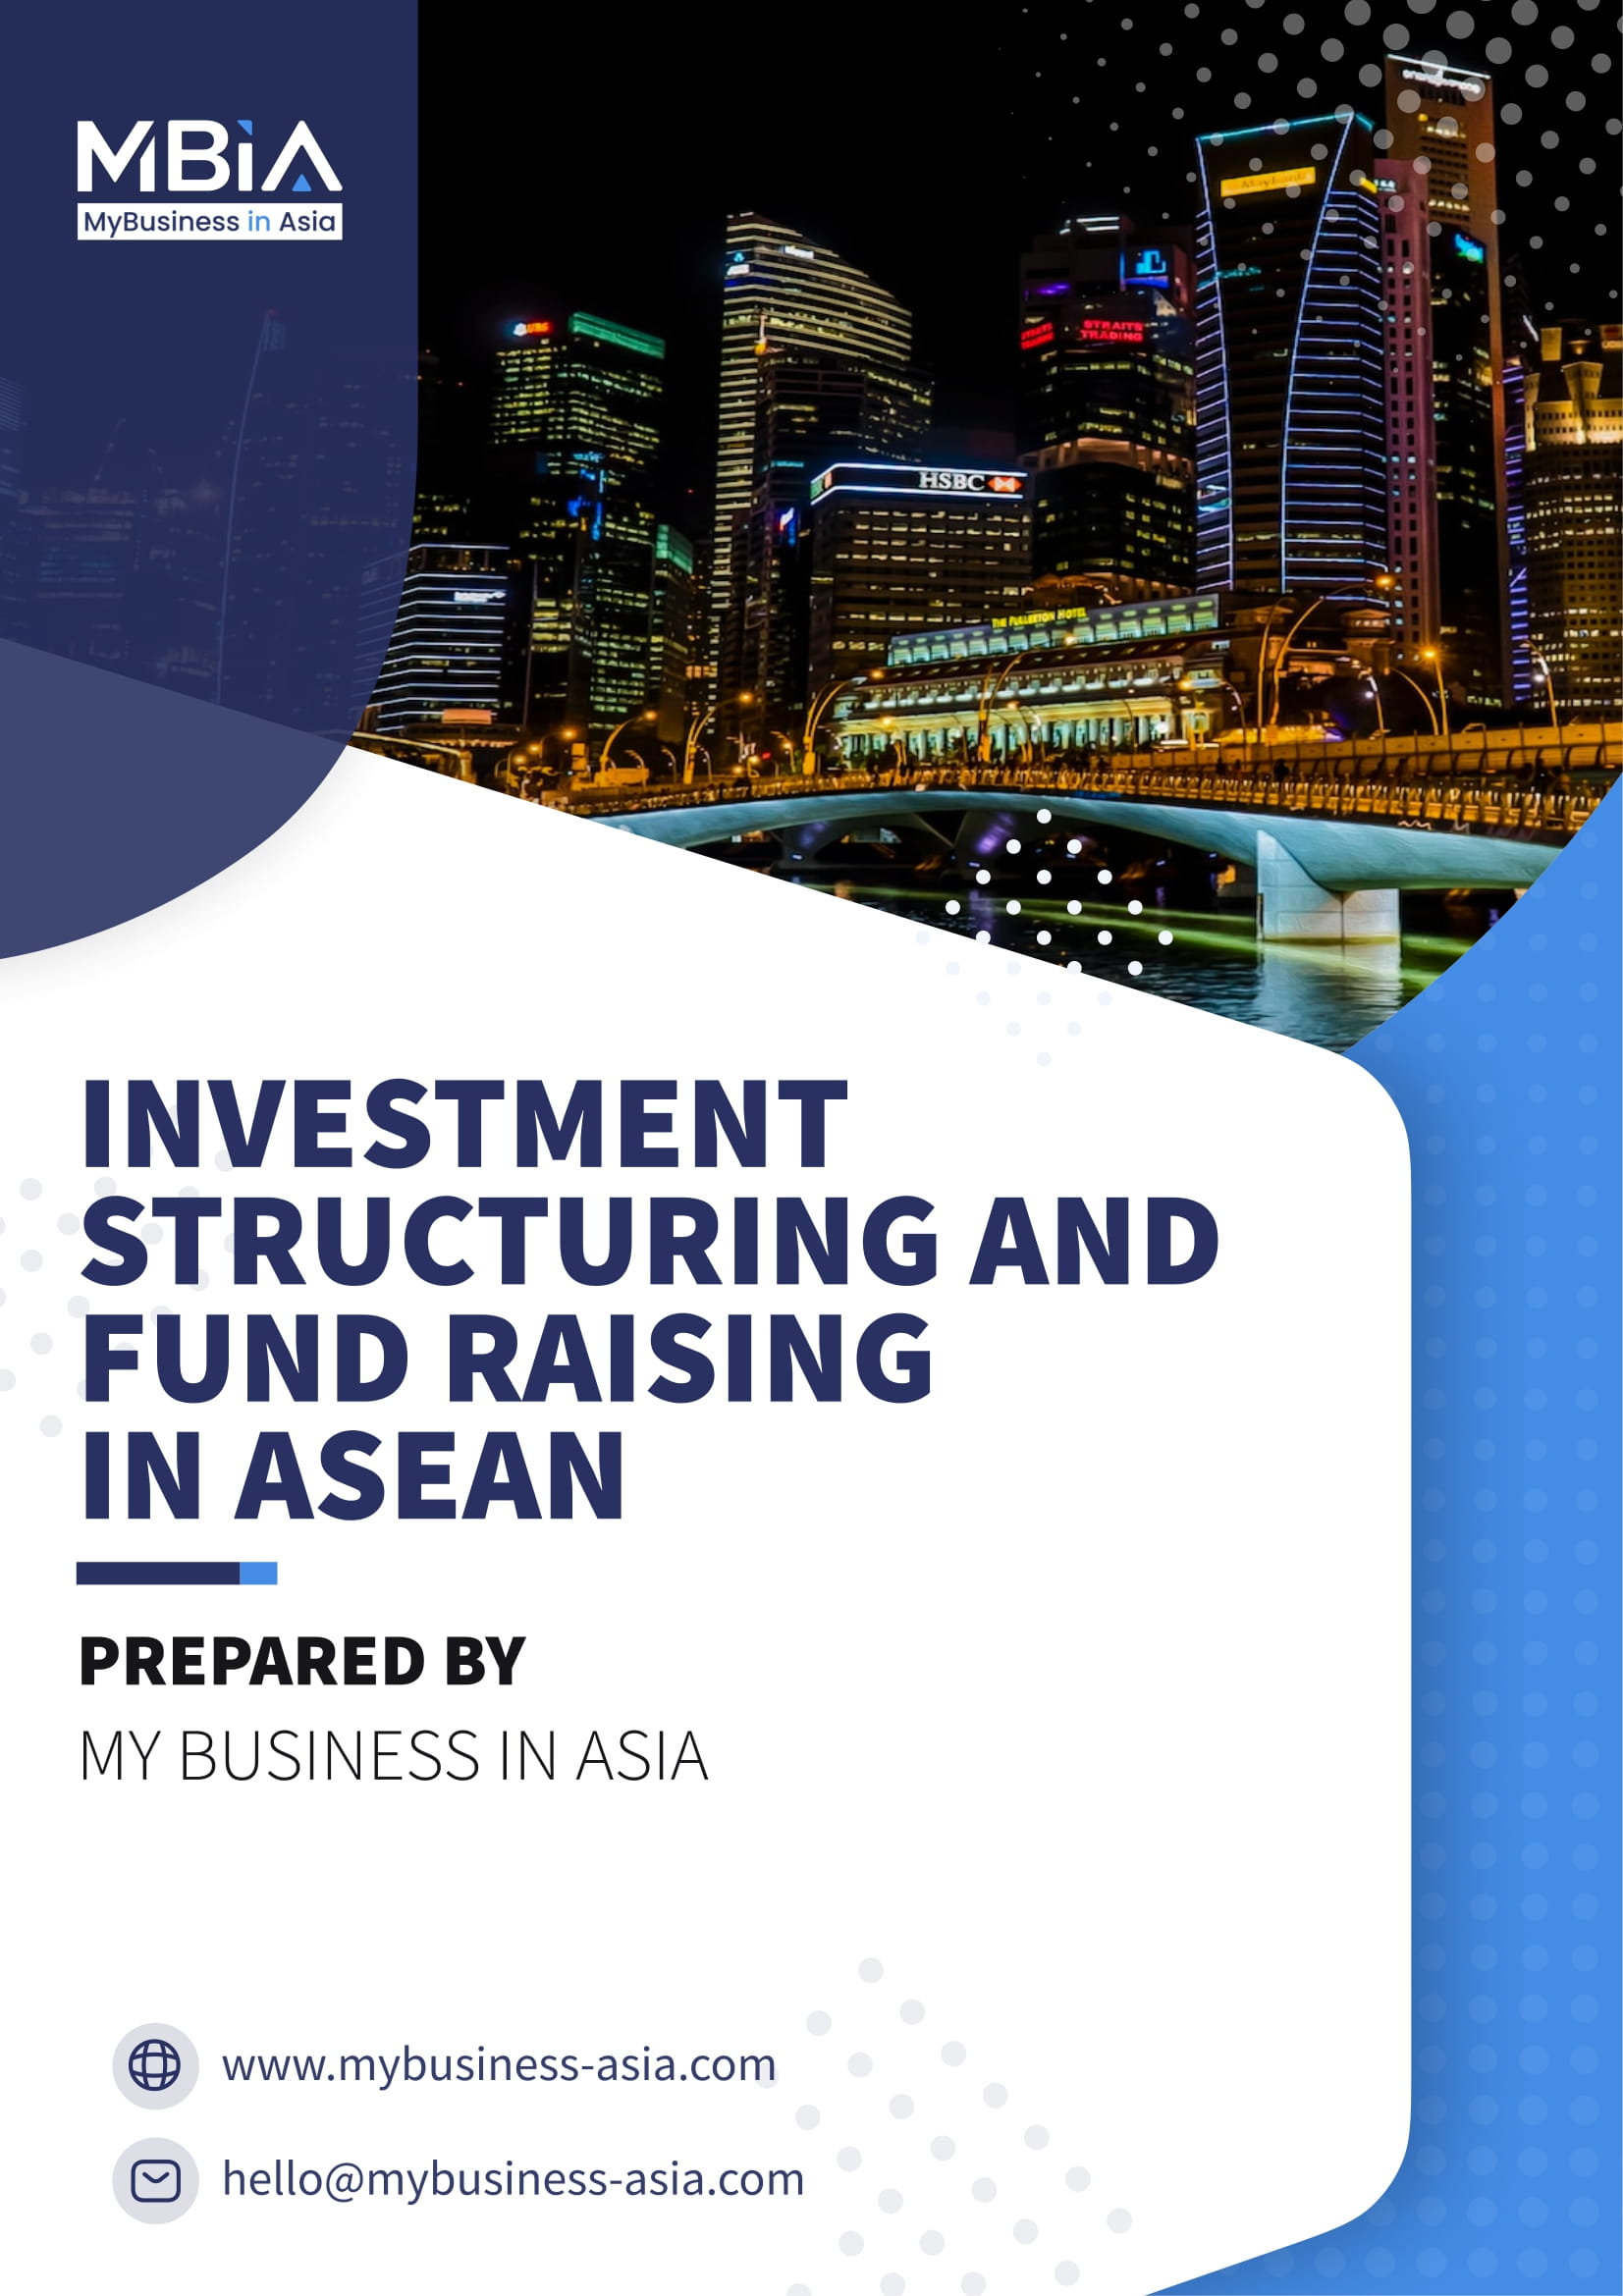 Investment Structuring and Fund Raising in ASEAN - Complete guide